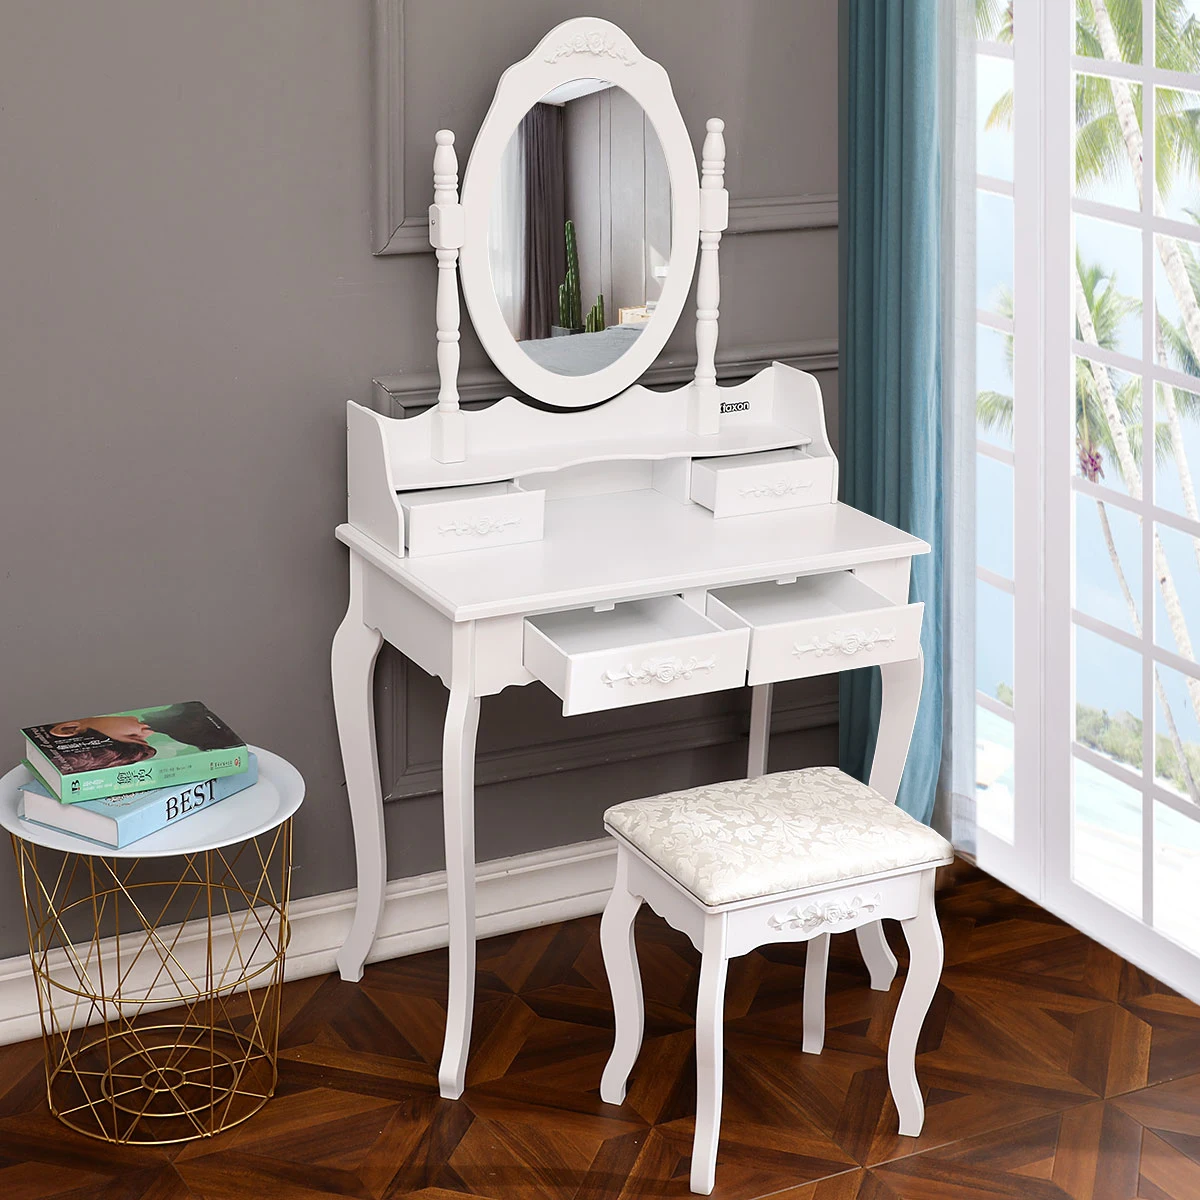 Best Sell Mirrored Make Up Vanity Table Modern Dressing Table Set With Stool For Living Room Buy Mirrored Dressing Table